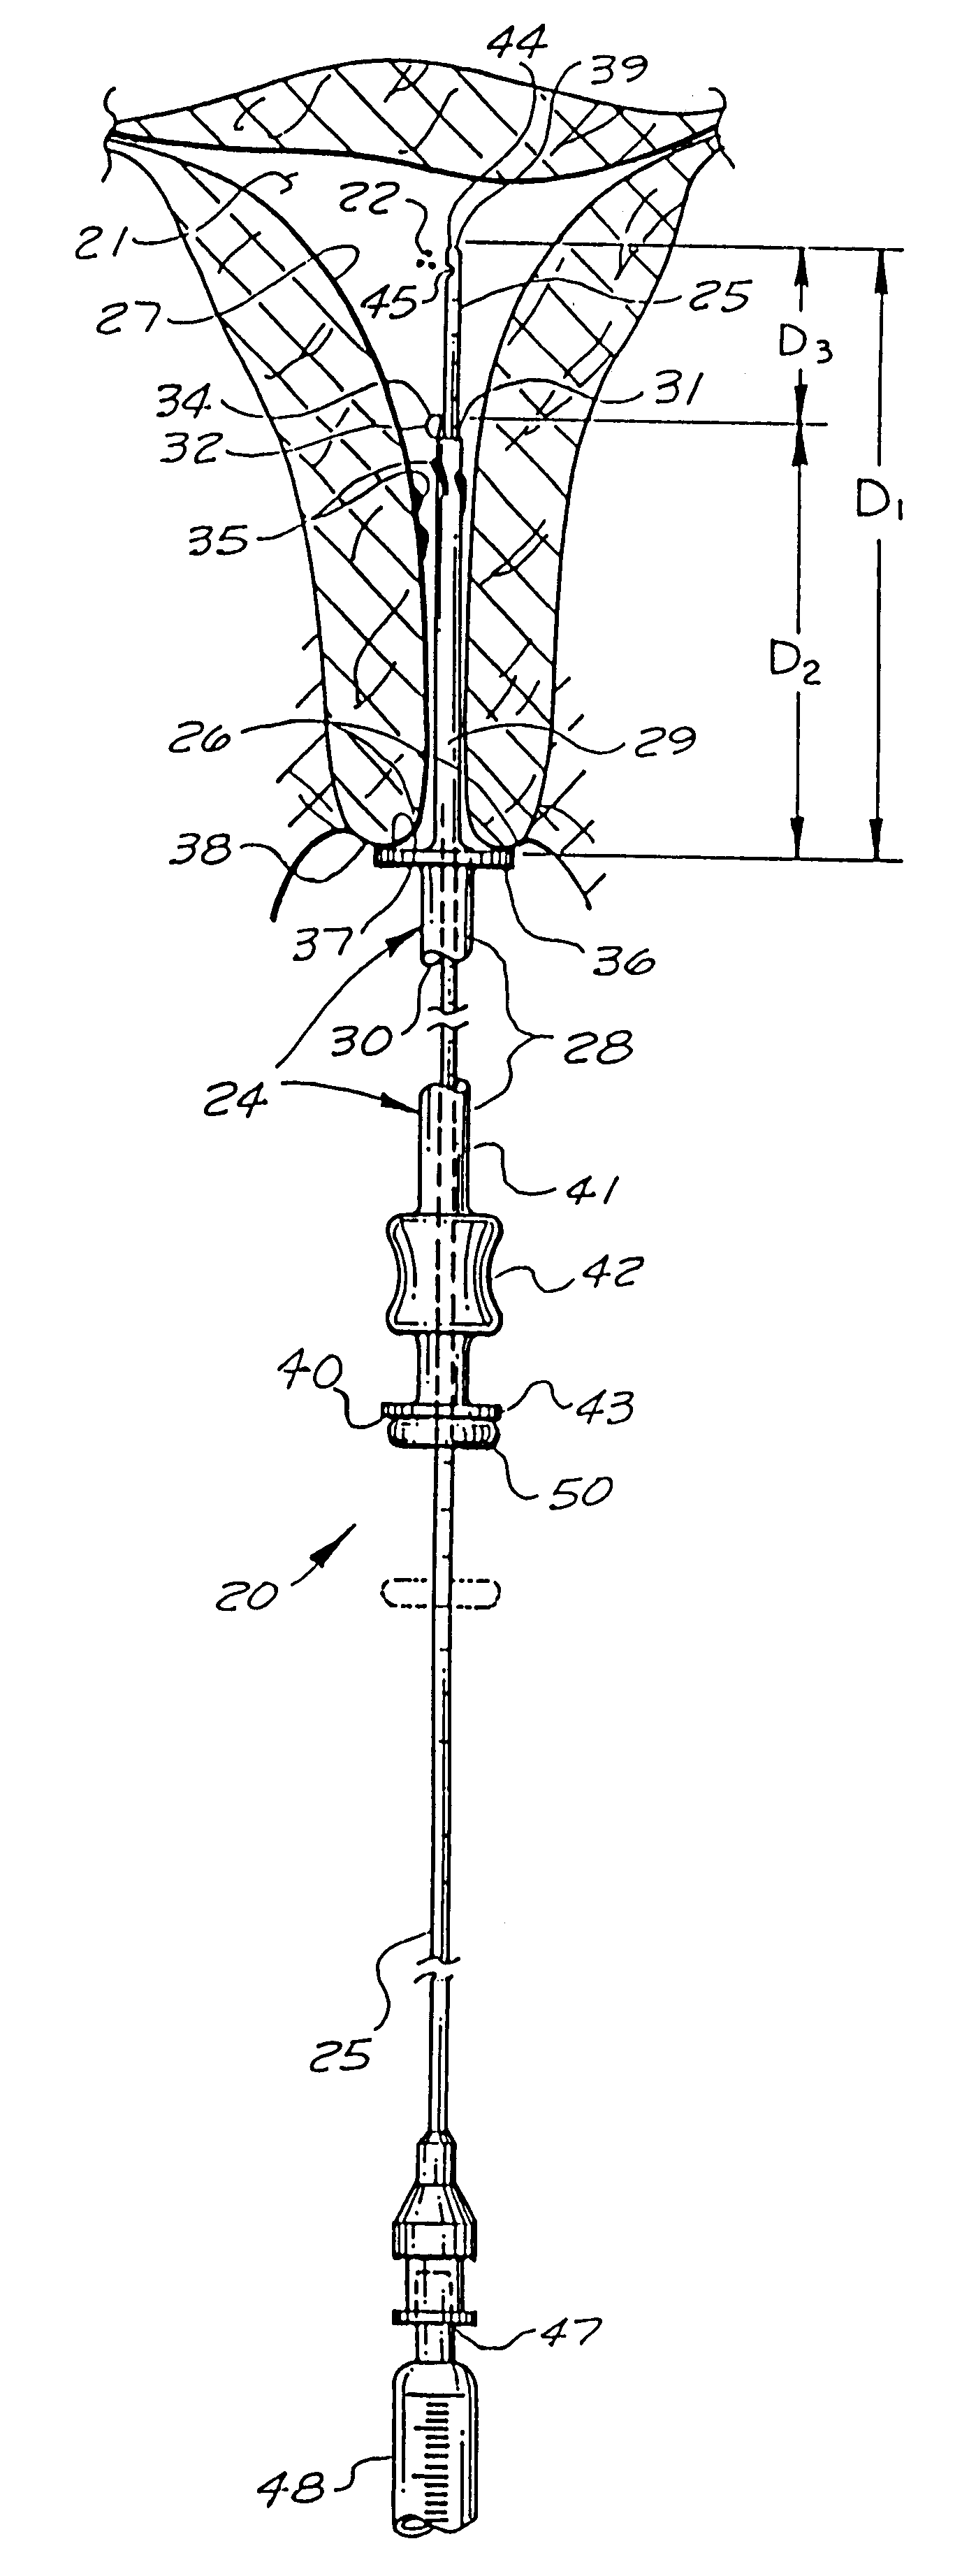 Catheter system for implanting embryos